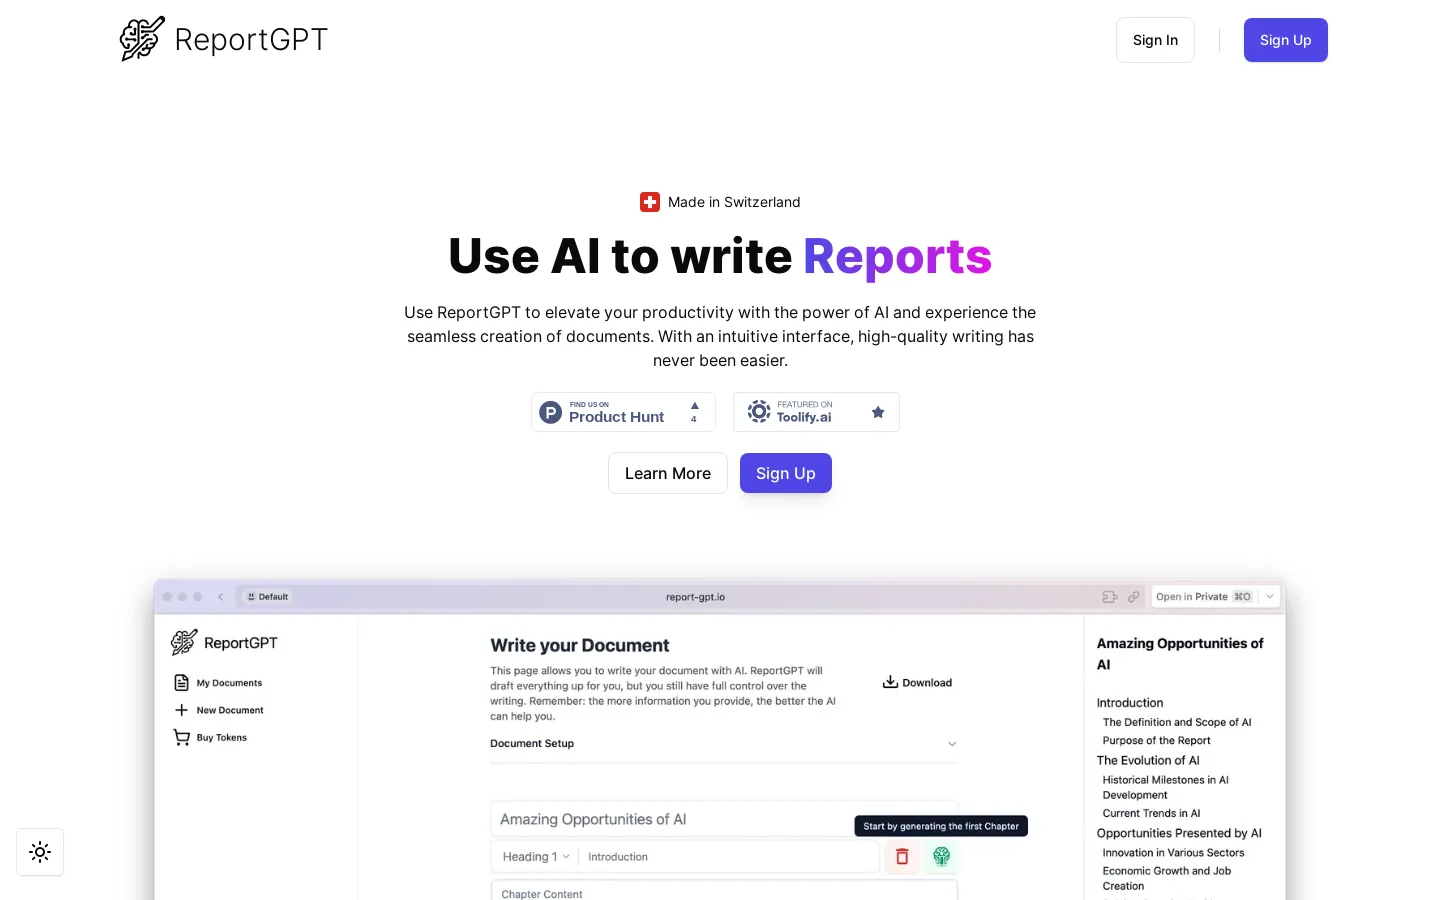 ReportGPT - AI Powered Writing Assistant